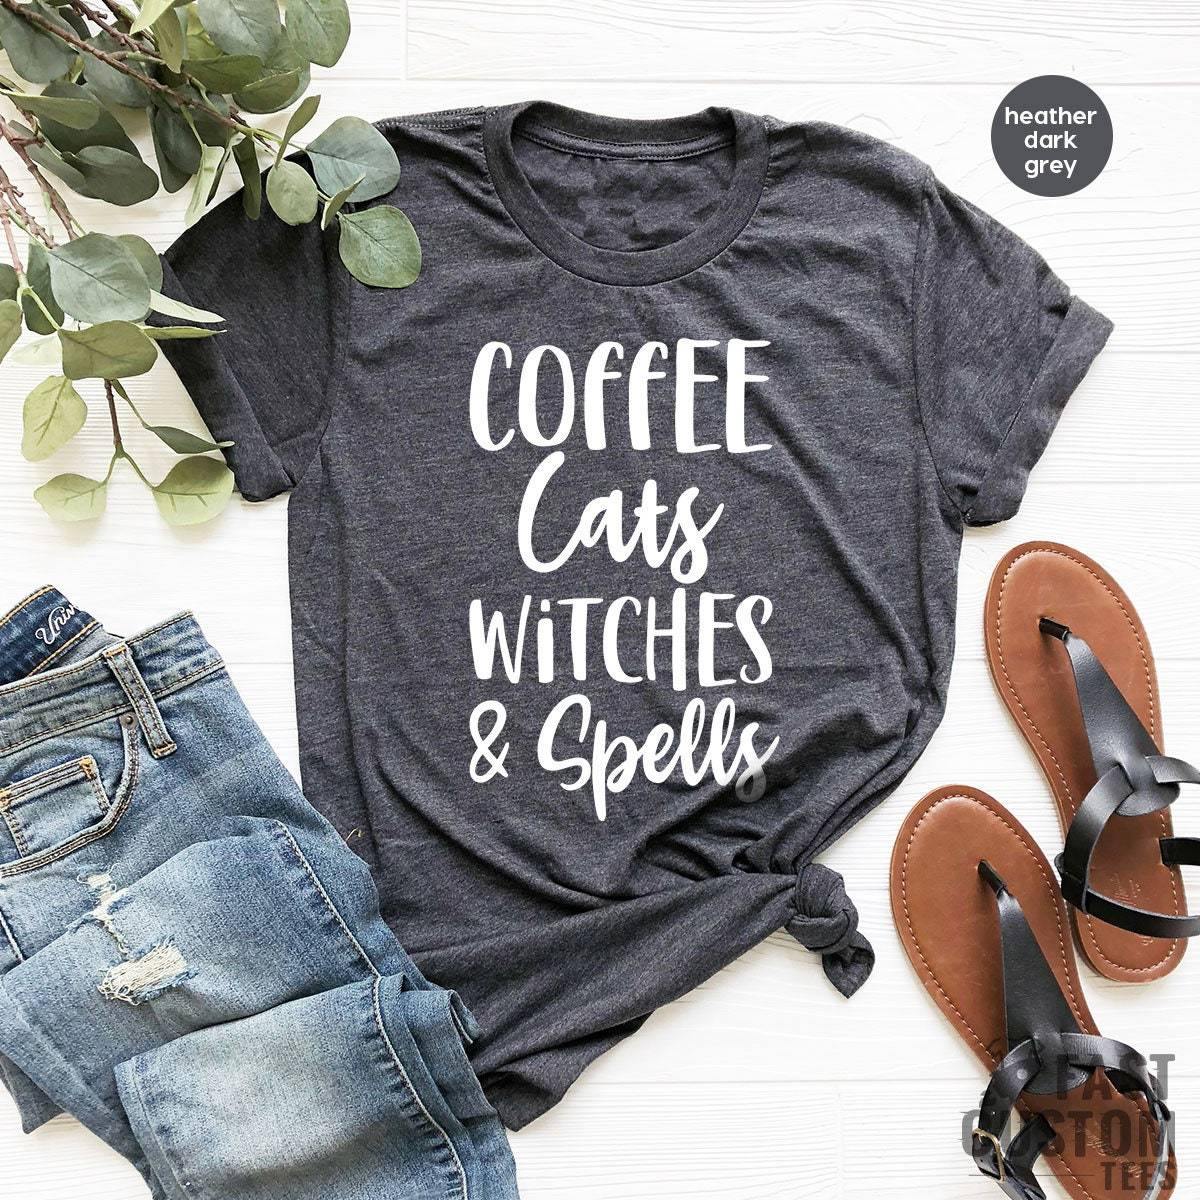 Coffee Cats Witches and Spells Shirt, Halloween Shirt, Witch Shirt, Coffee Lover Shirt, Funny Halloween Shirt, Halloween Gift - Fastdeliverytees.com